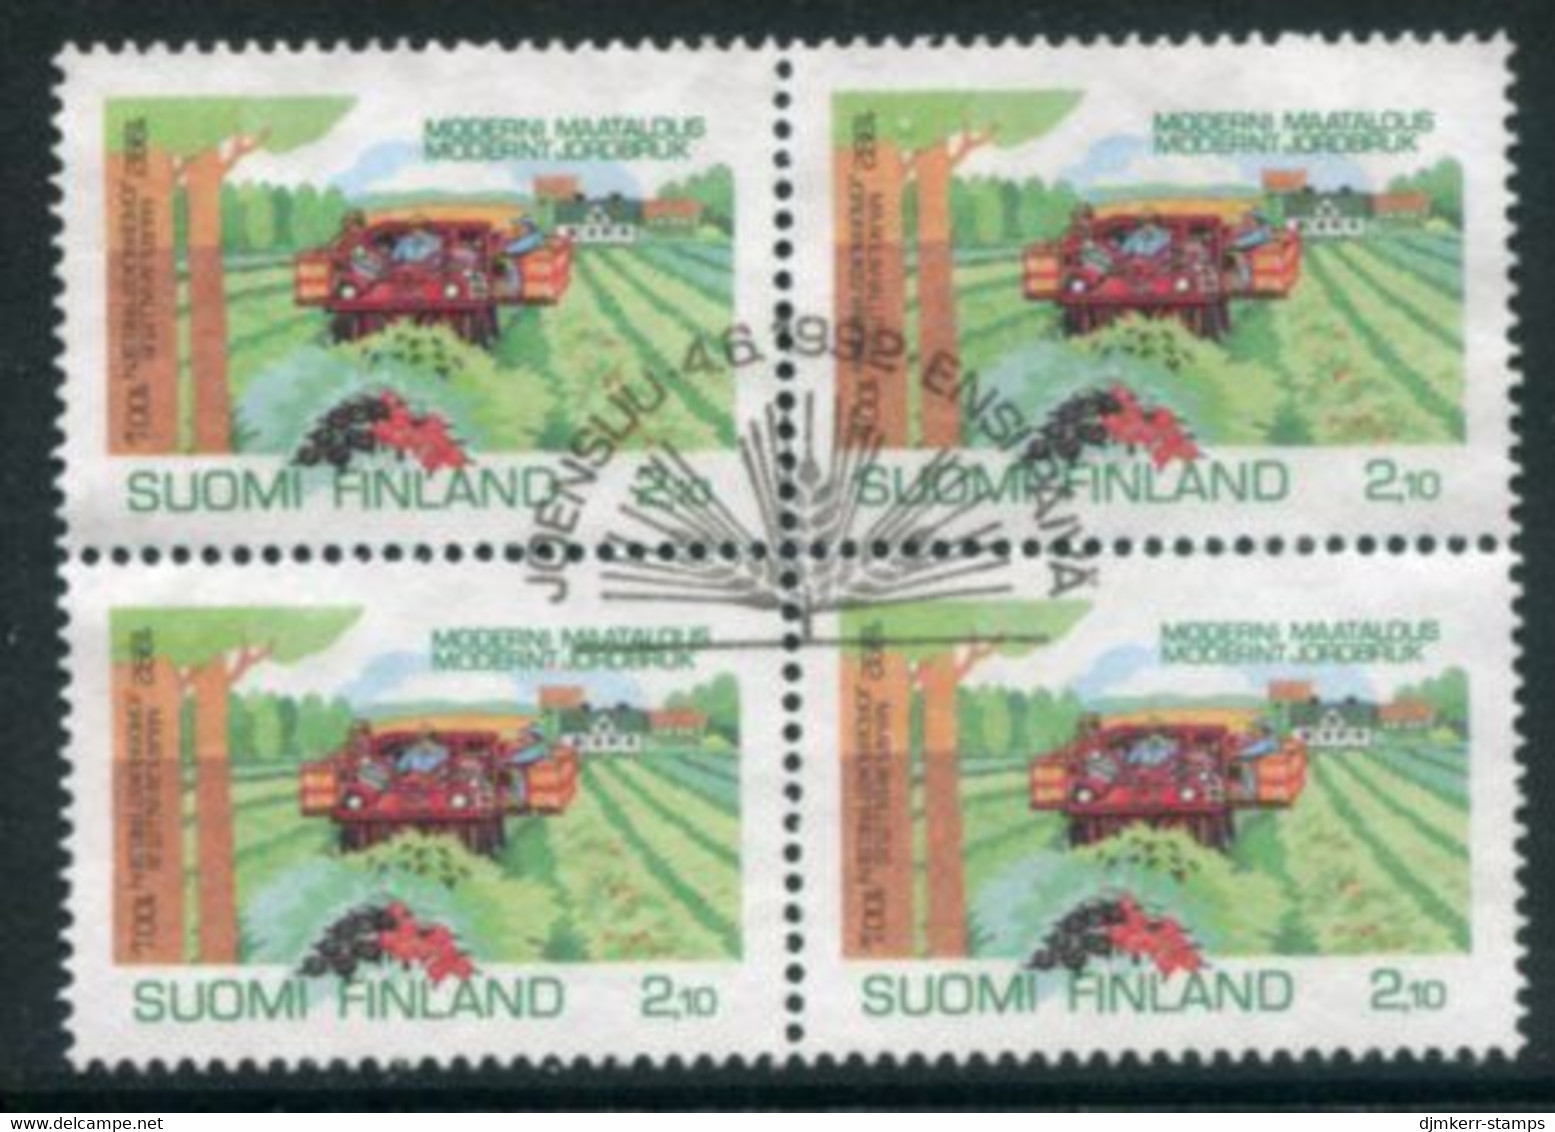 FINLAND 1992 Centenary Of Agriculture Ministry Block Of 4 Used.  Michel 1180 - Used Stamps